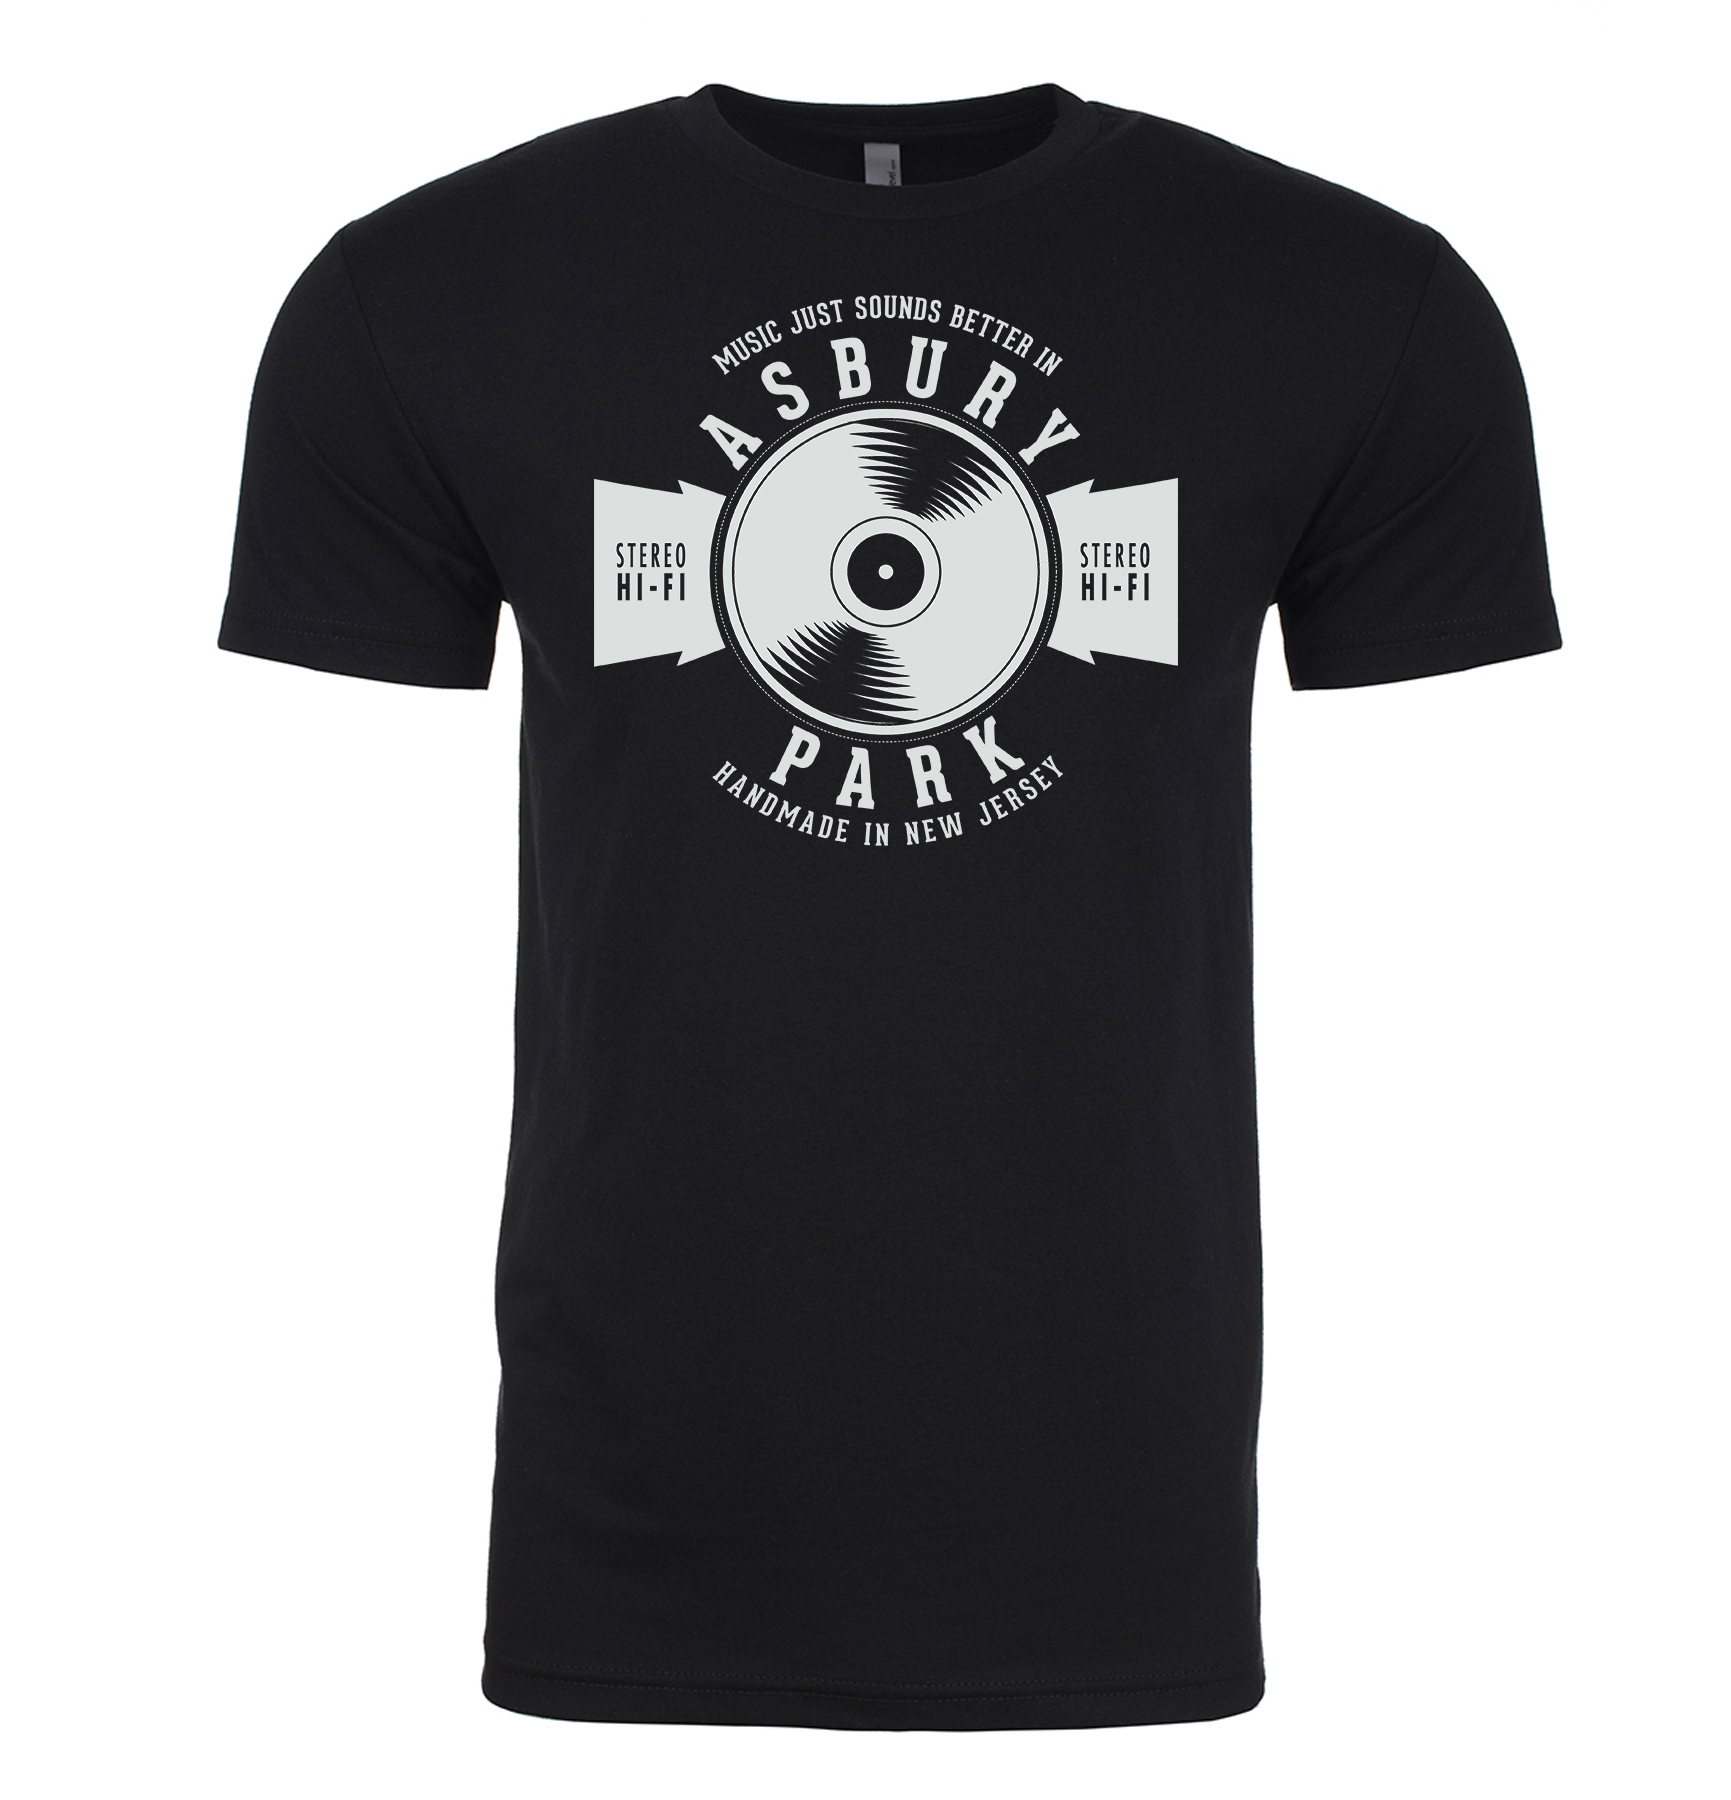 Music Just Sounds Better In Asbury Park Tee Shirt | Asbury Park Fight Club